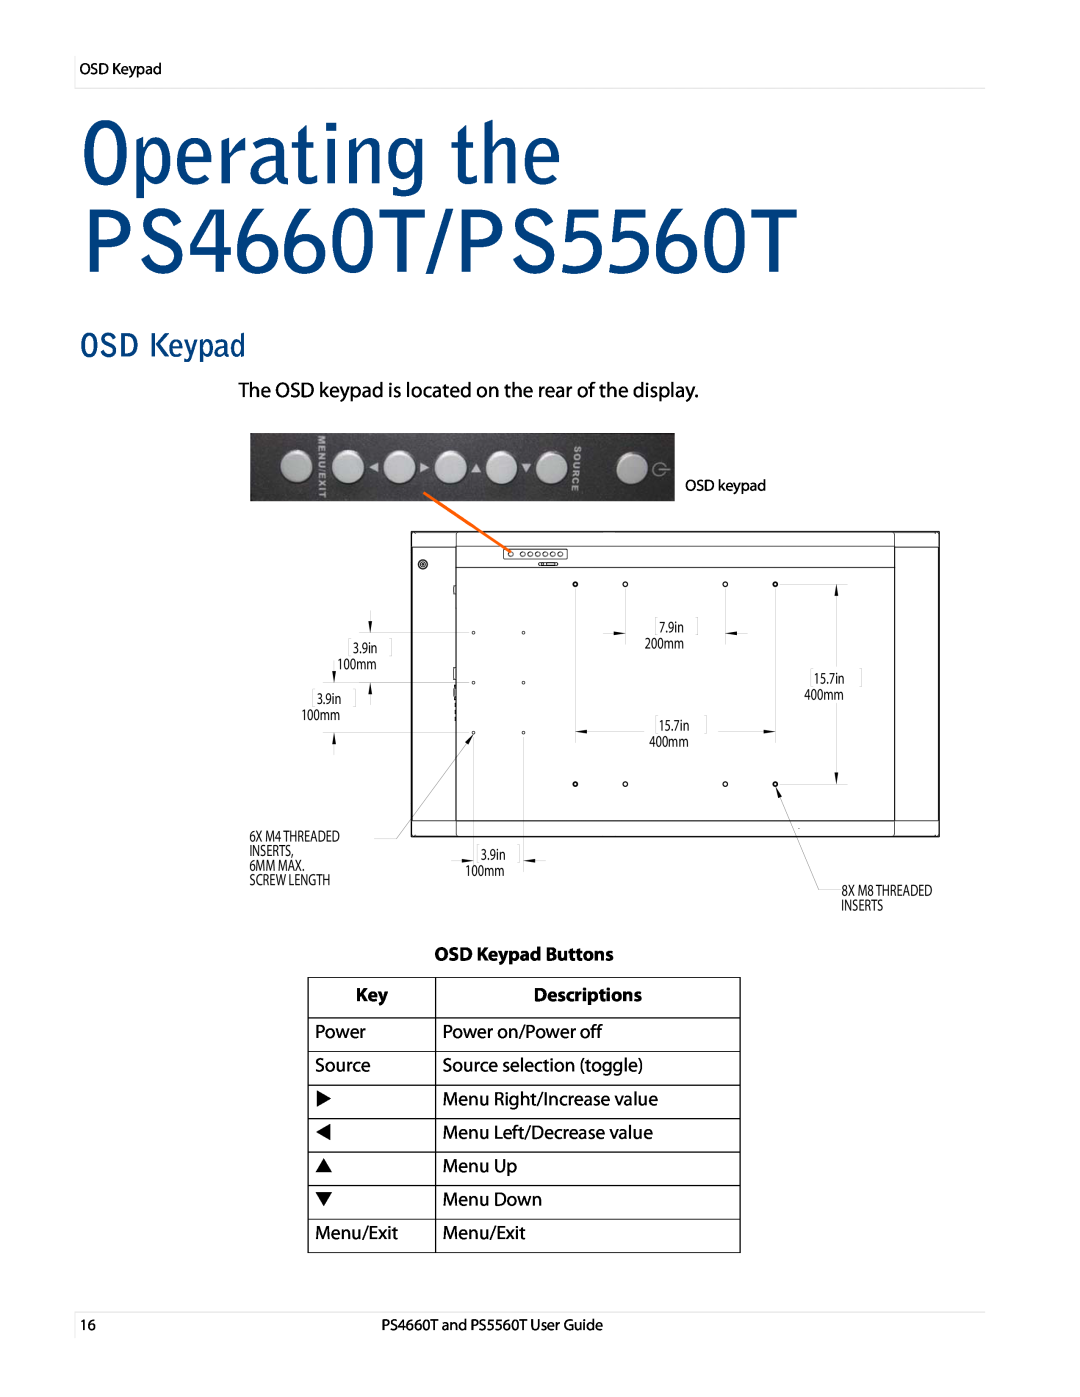 Planar PS4660T and PS5560T, PS466OT user manual Operating the PS4660T/PS5560T, OSD Keypad Buttons, Descriptions 